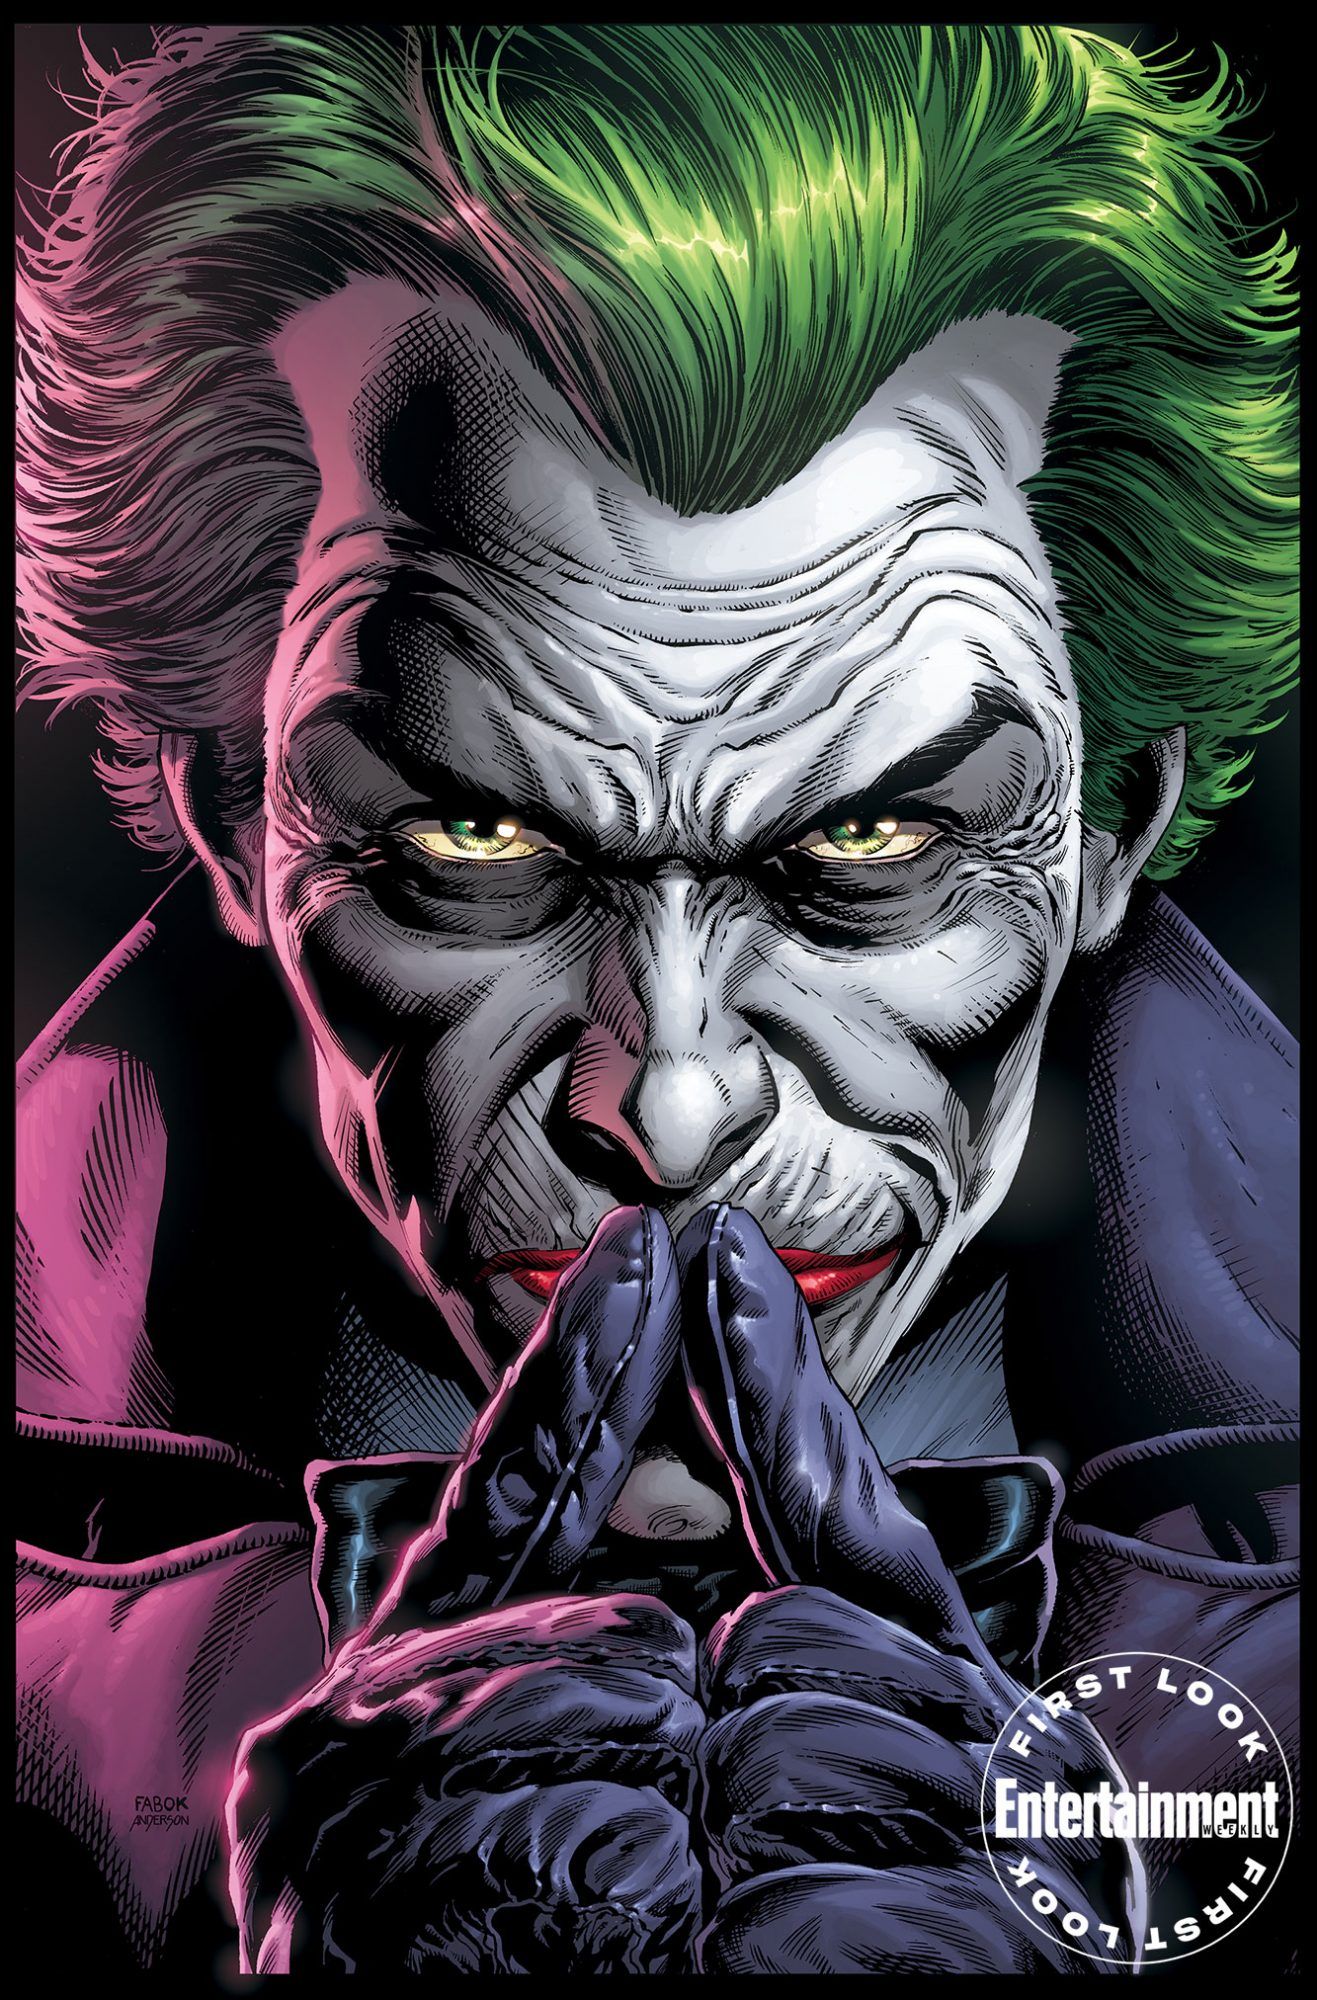 Three Jokers is Going to Change The Batman Villain Forever